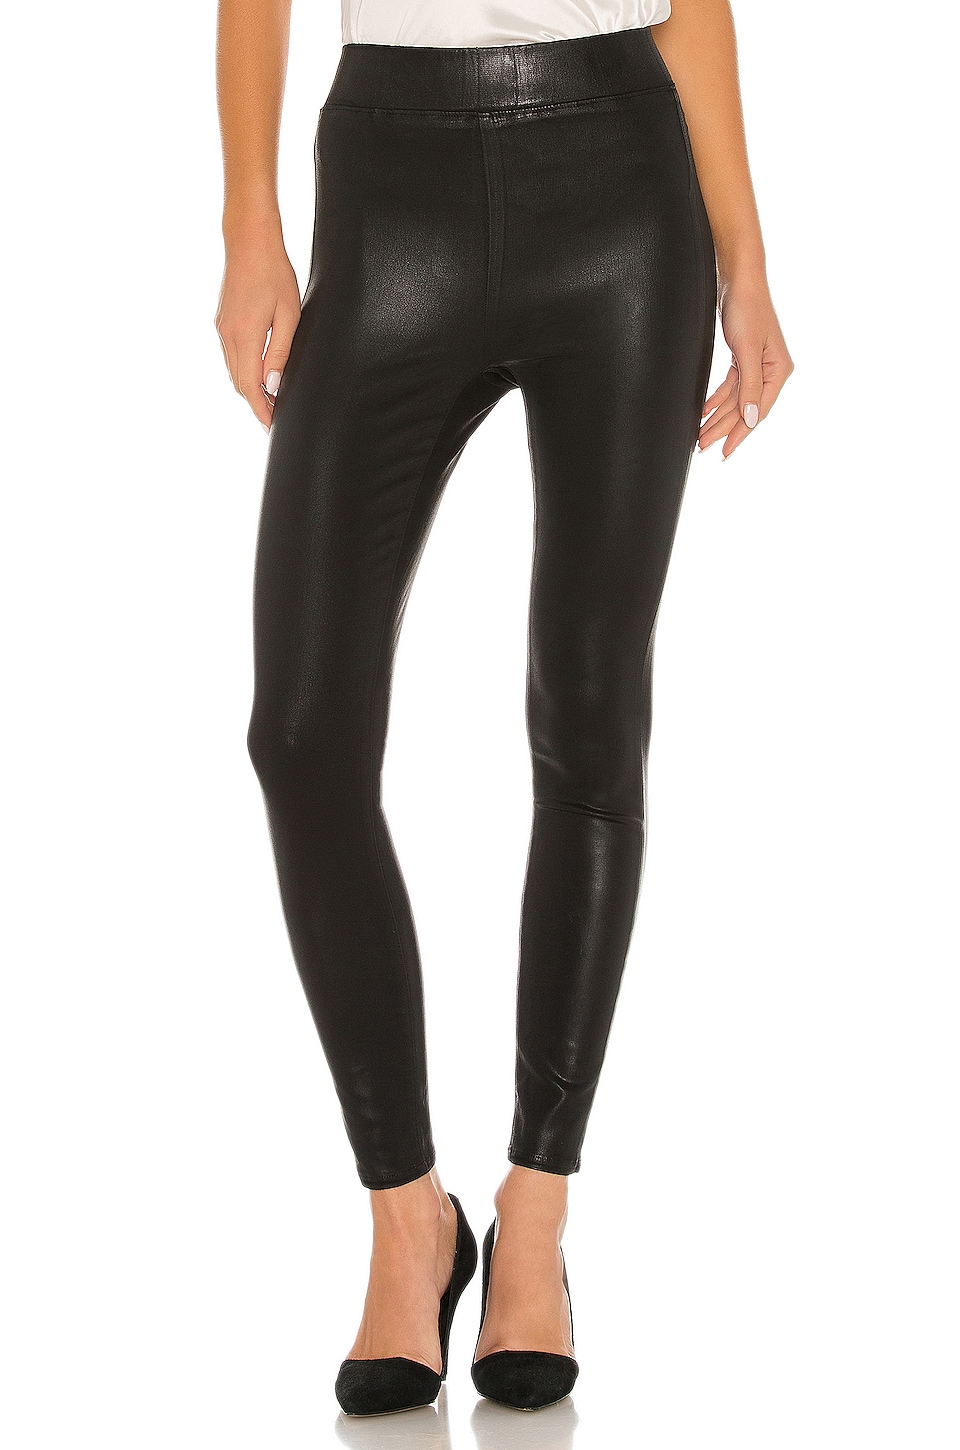 L'AGENCE Rochelle Pull On Pant in Black Coated | REVOLVE